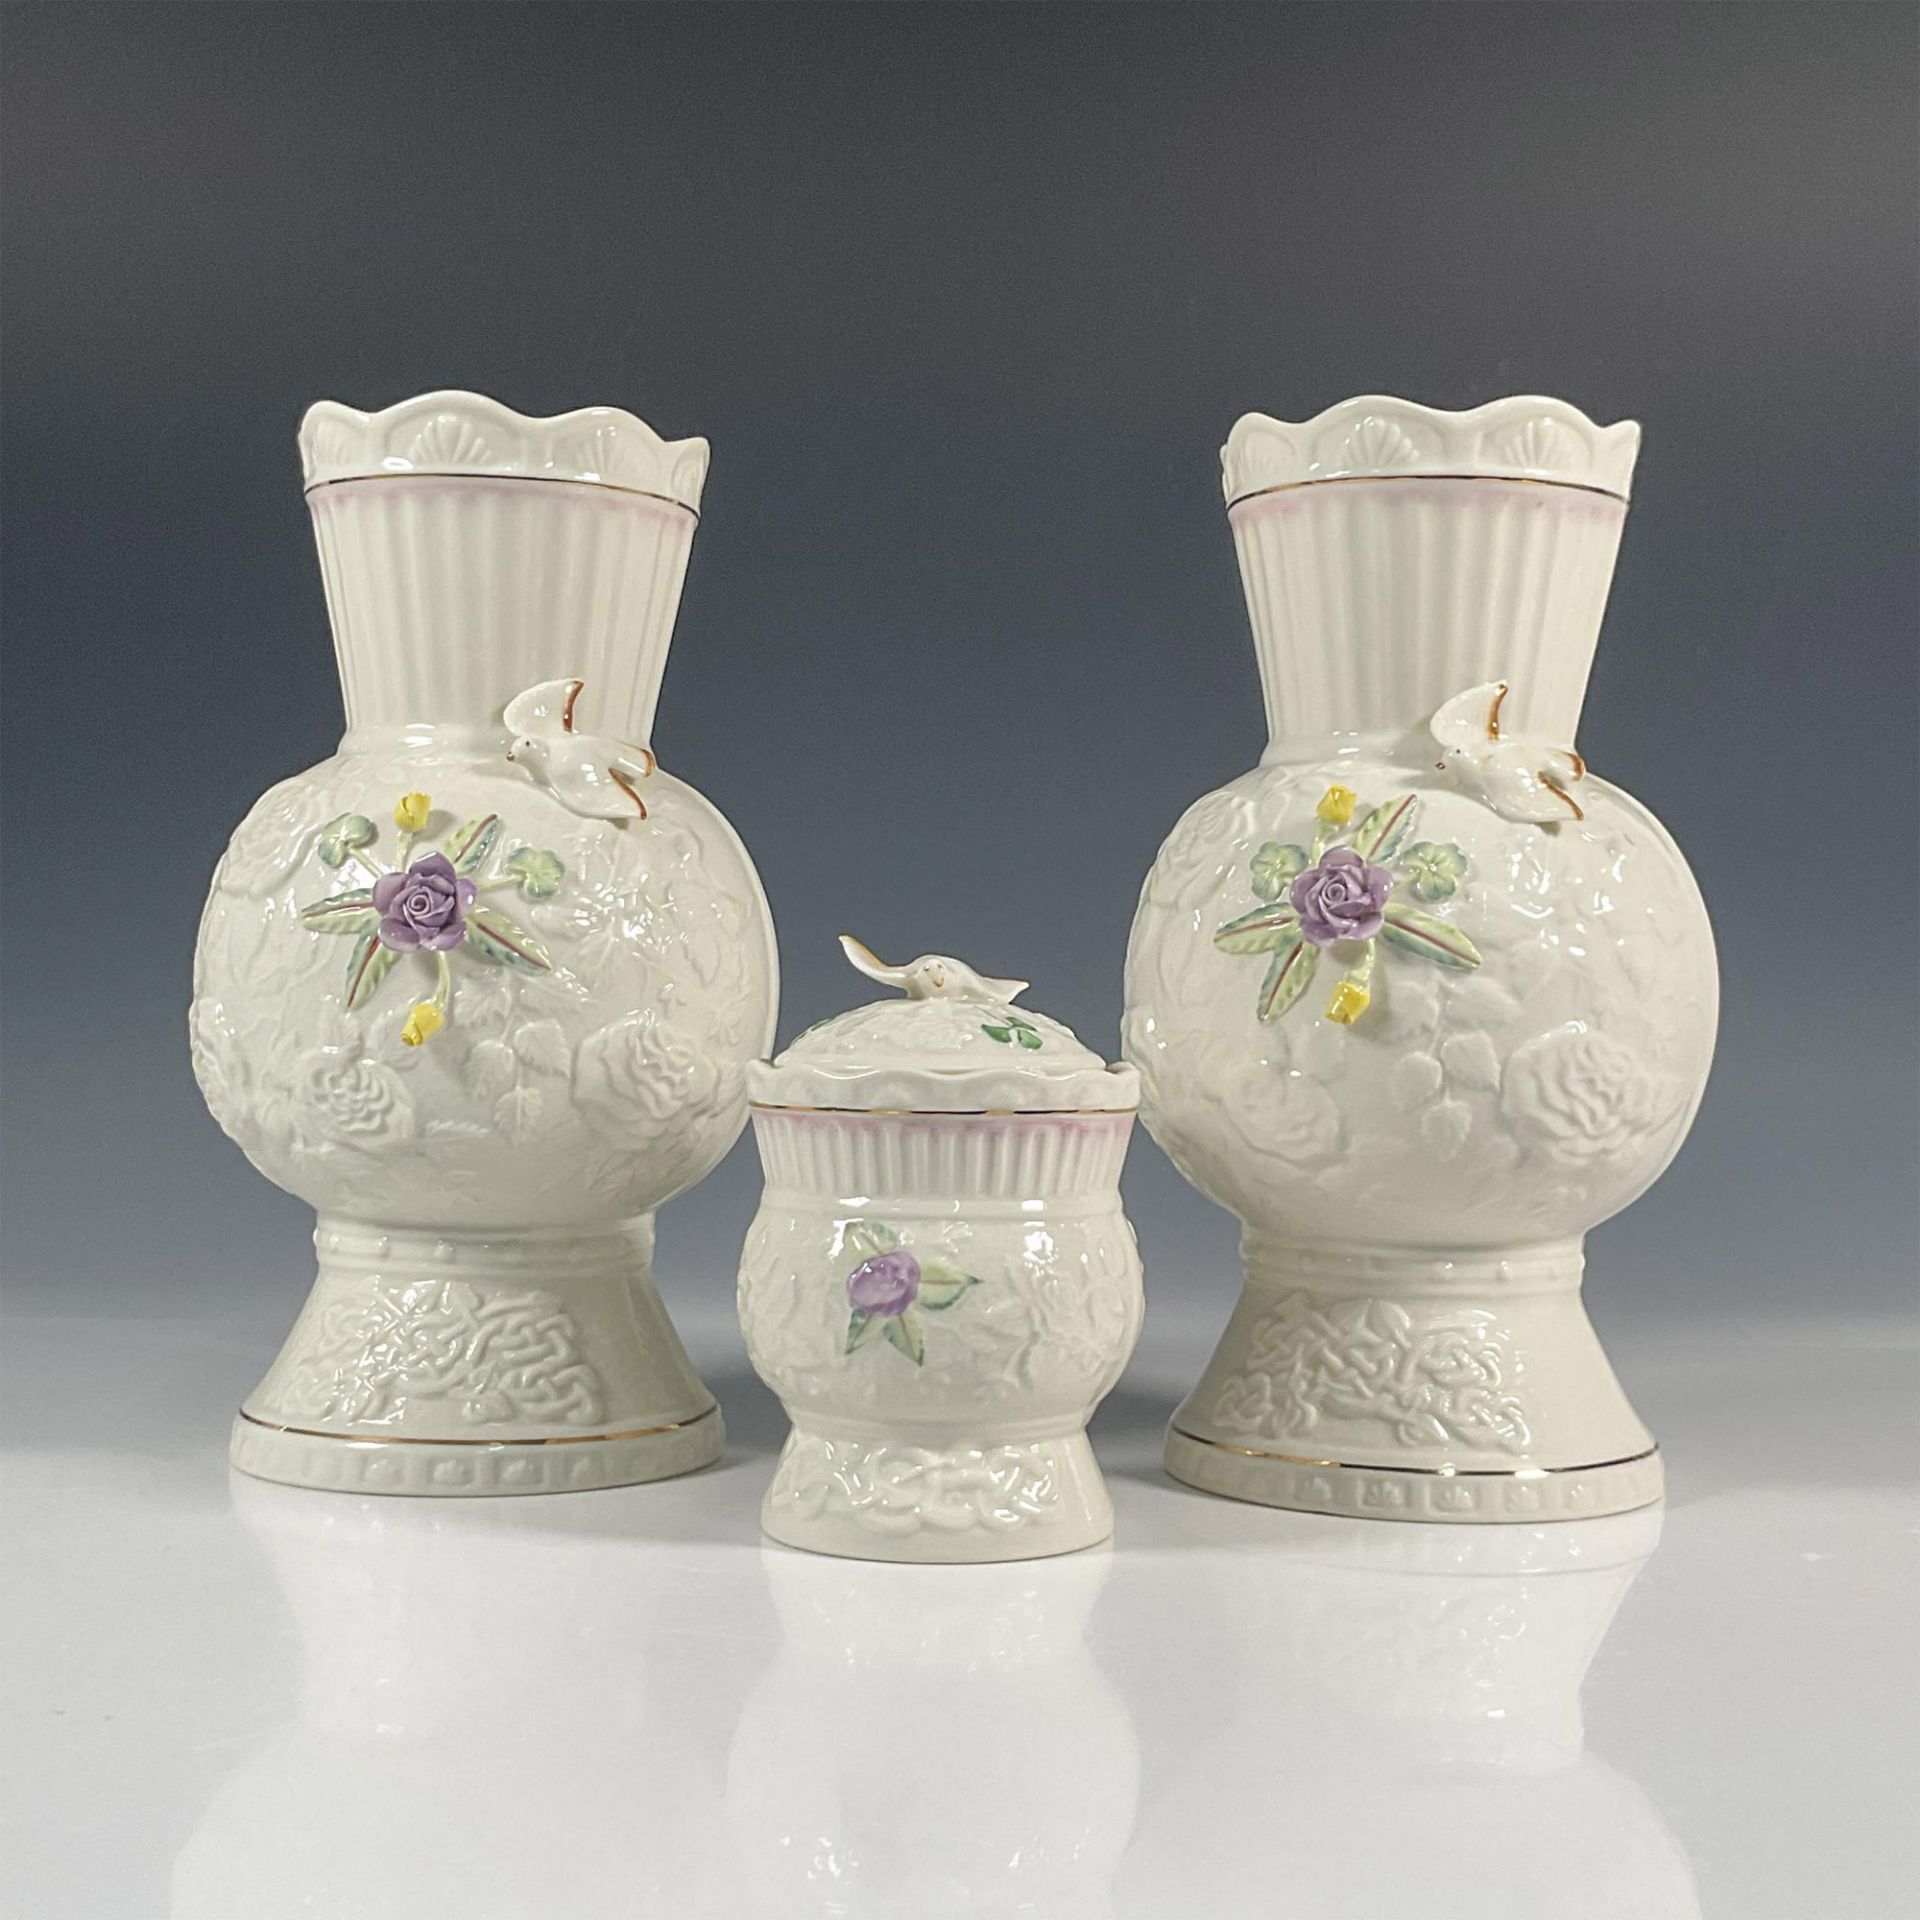 3pc Belleek Pottery Vases and Lidded Box, Song Bird